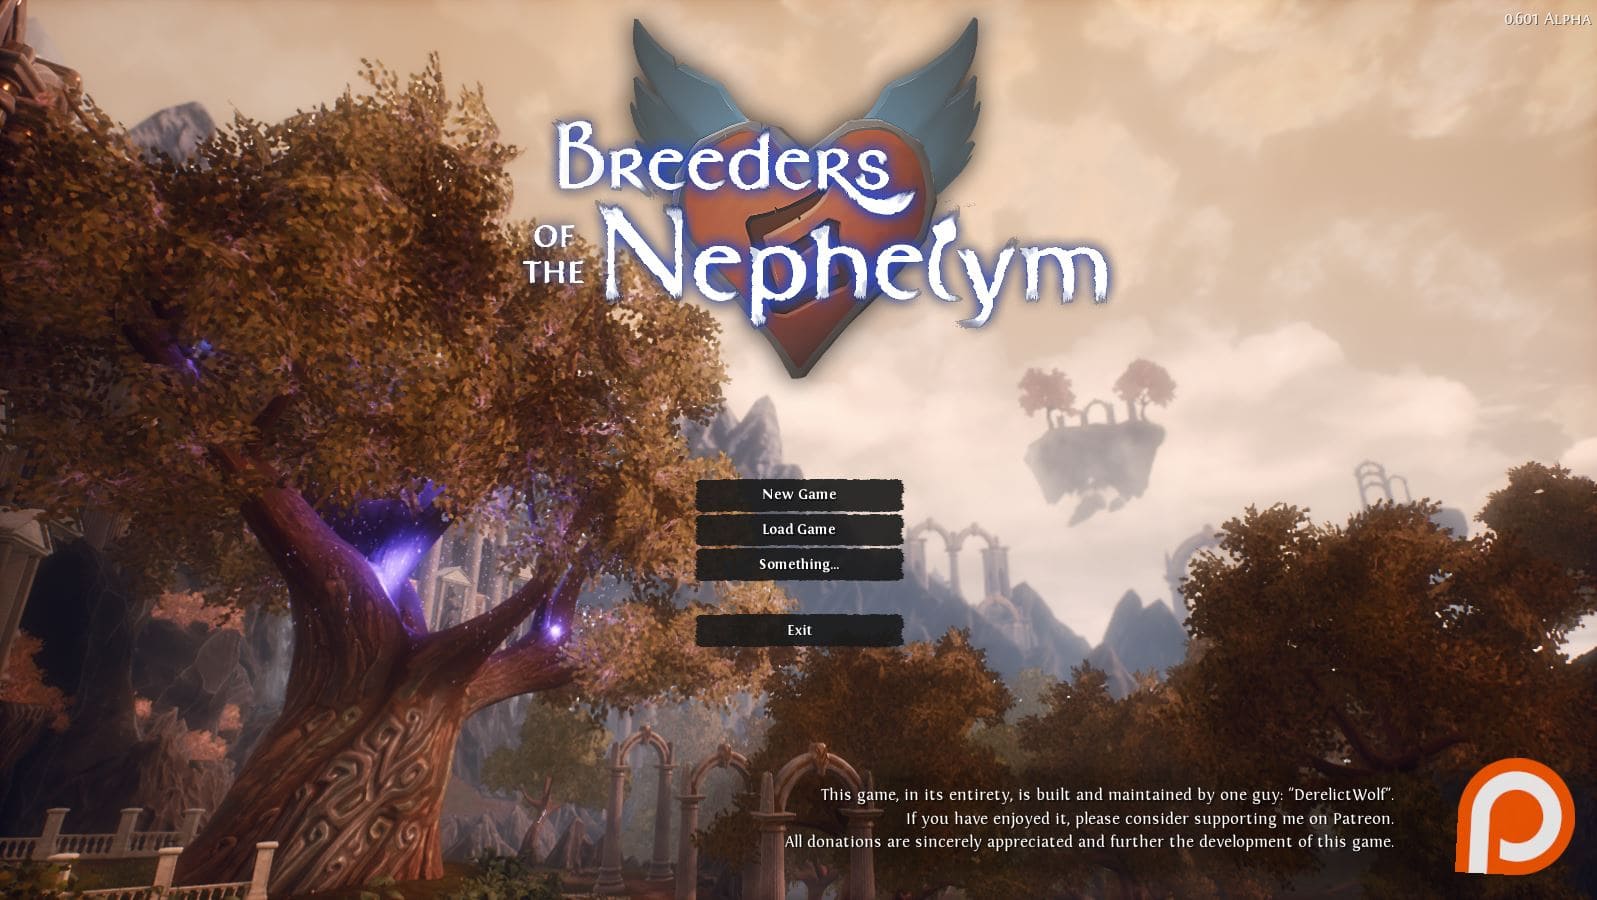 Porn Games Download on X: Breeders Of The Nephelym - Version 0.661 Alpha  #Adventure #breeders #DownloadPorn #incest #monsterssex #rpg #wolfsex  #xxxgame t.coai2wK0wV57 t.co3C2q7YCuTf  X